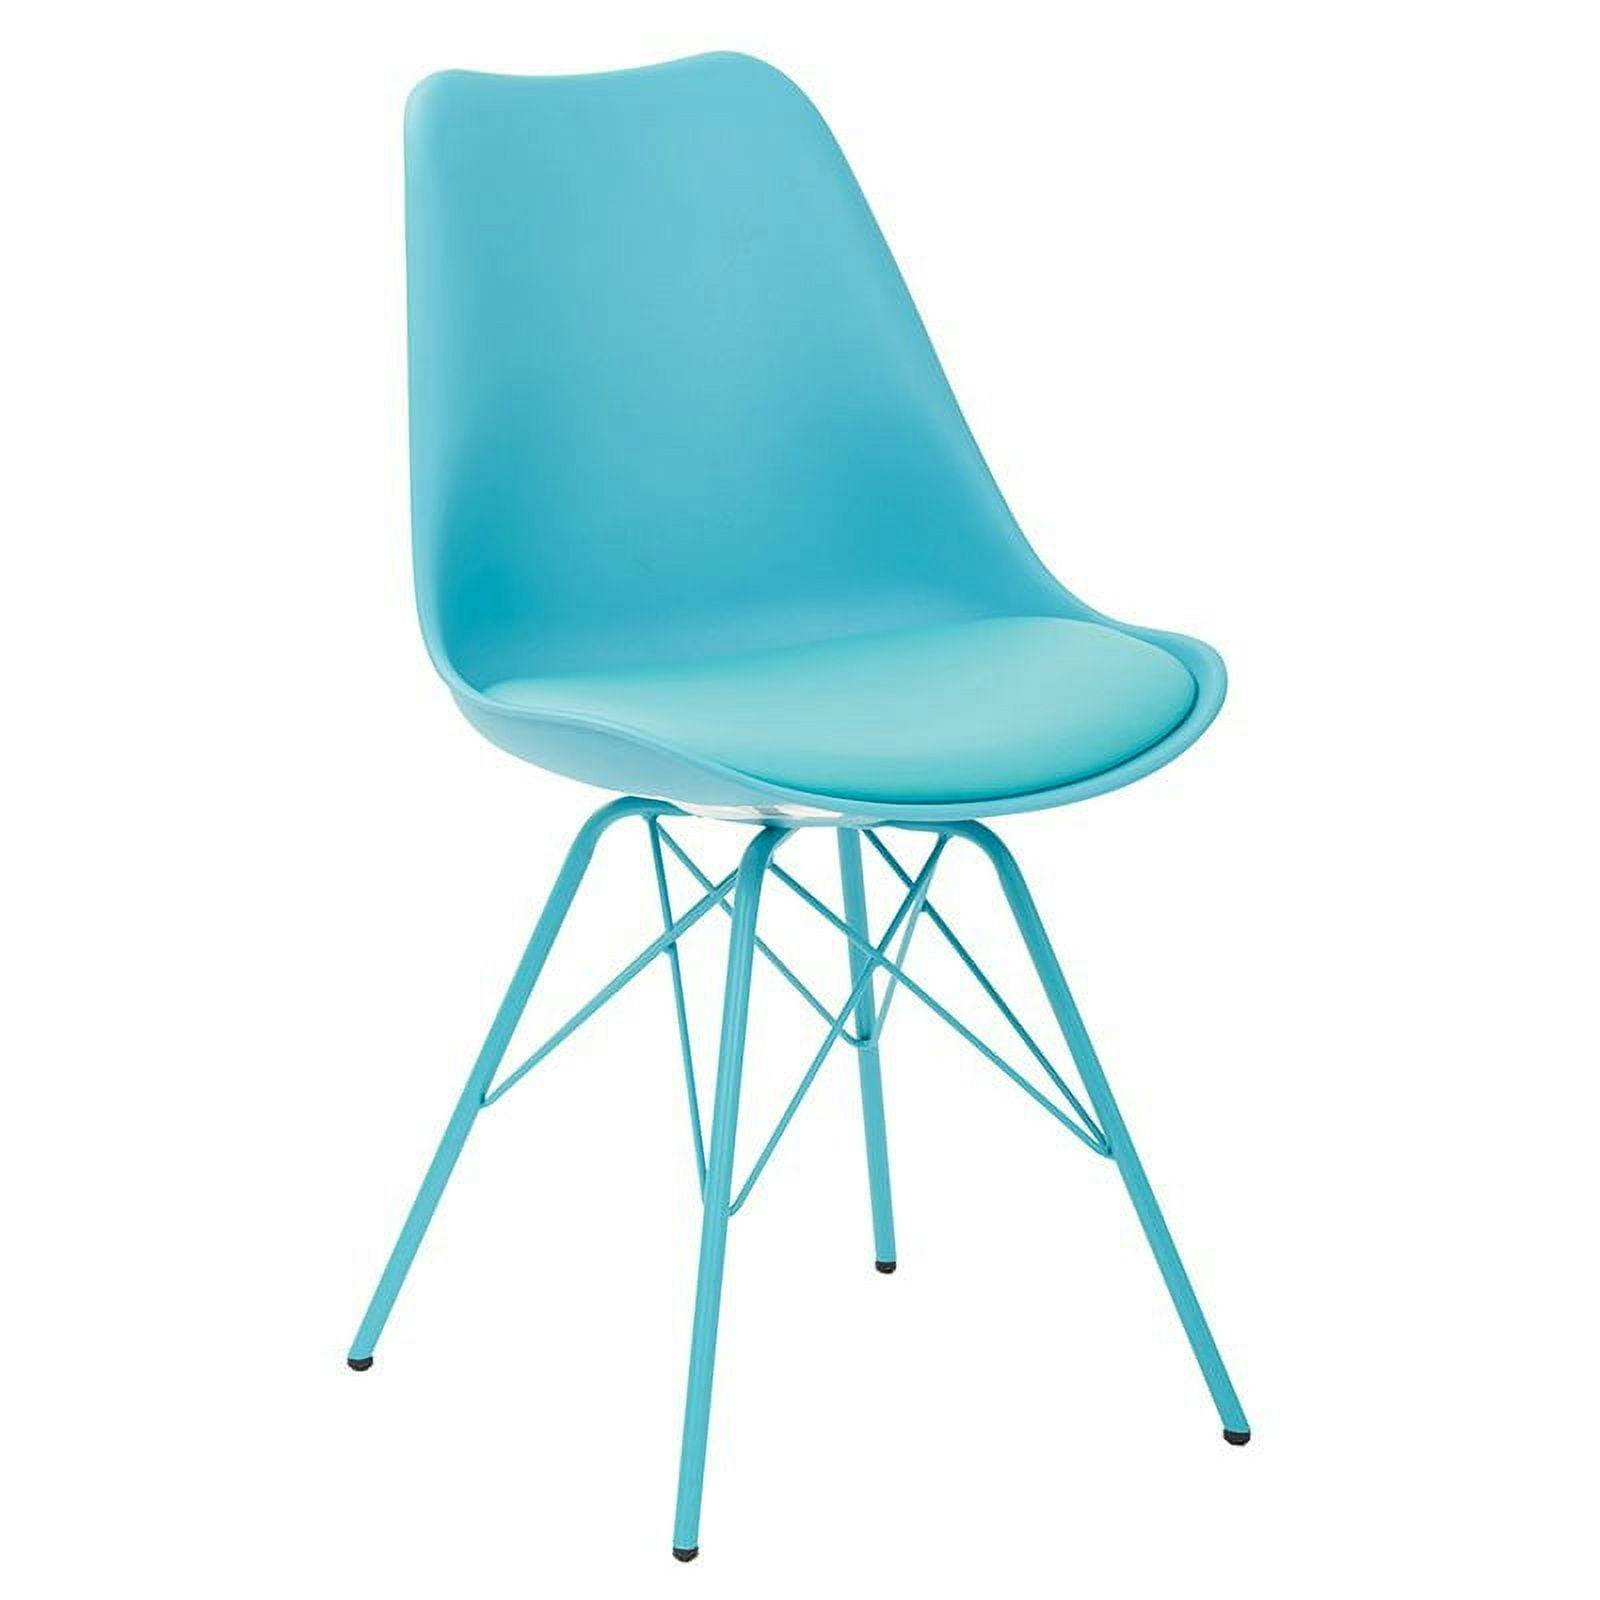 Modern Teal Faux Leather Upholstered Side Chair with Alloy Legs